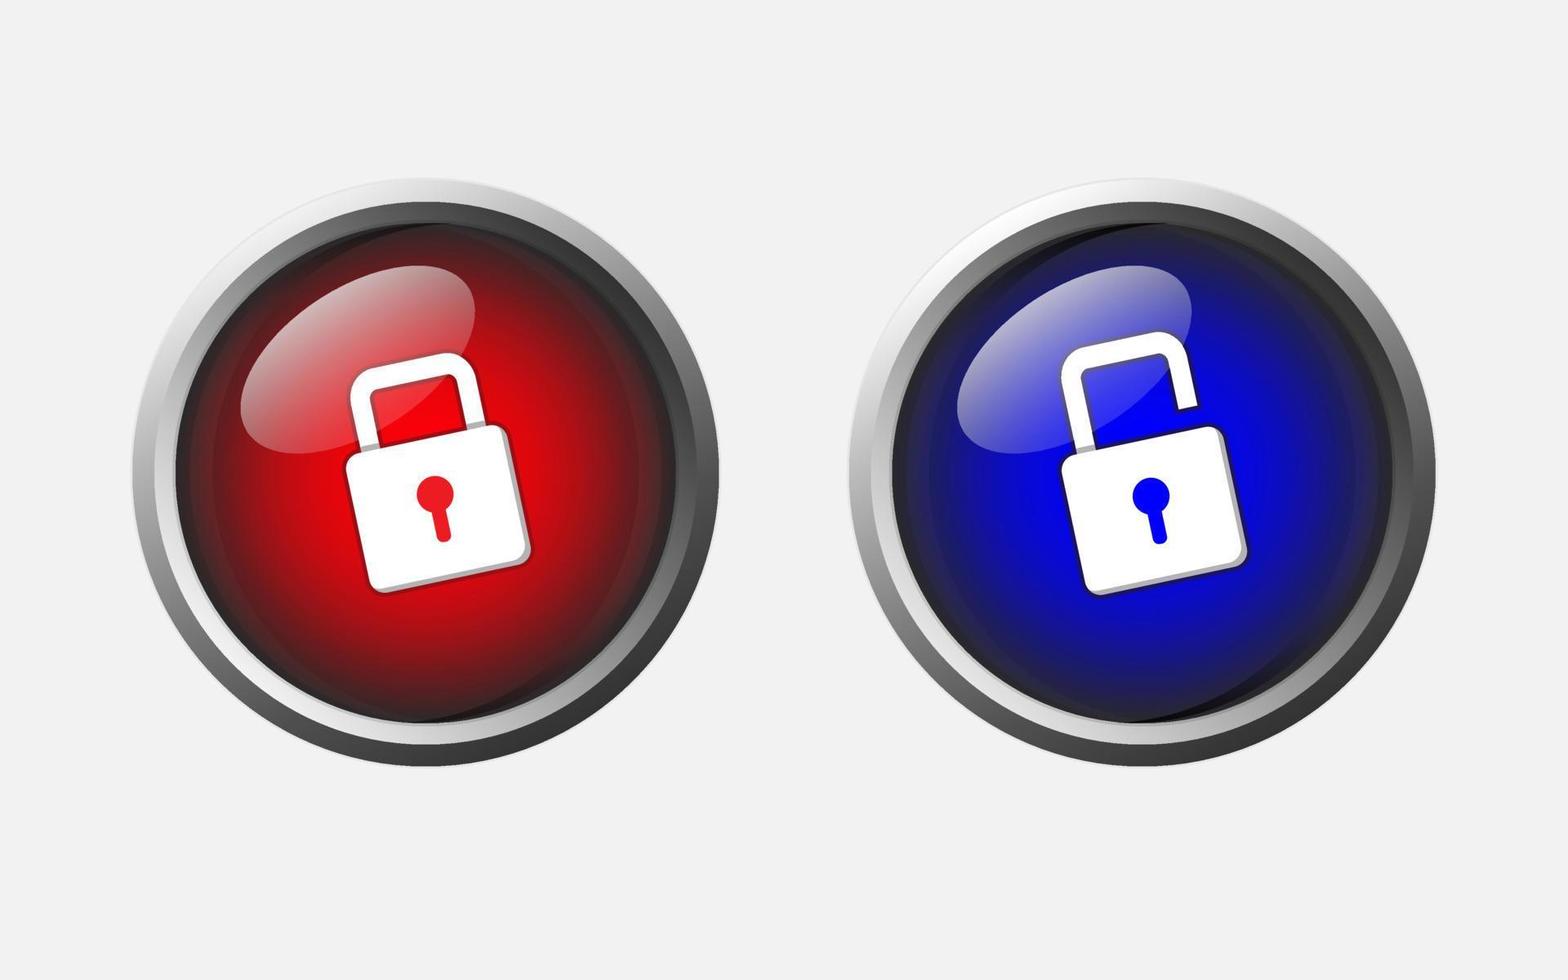 Padlock illustration icon design. Locked and open sign concept for information hint vector